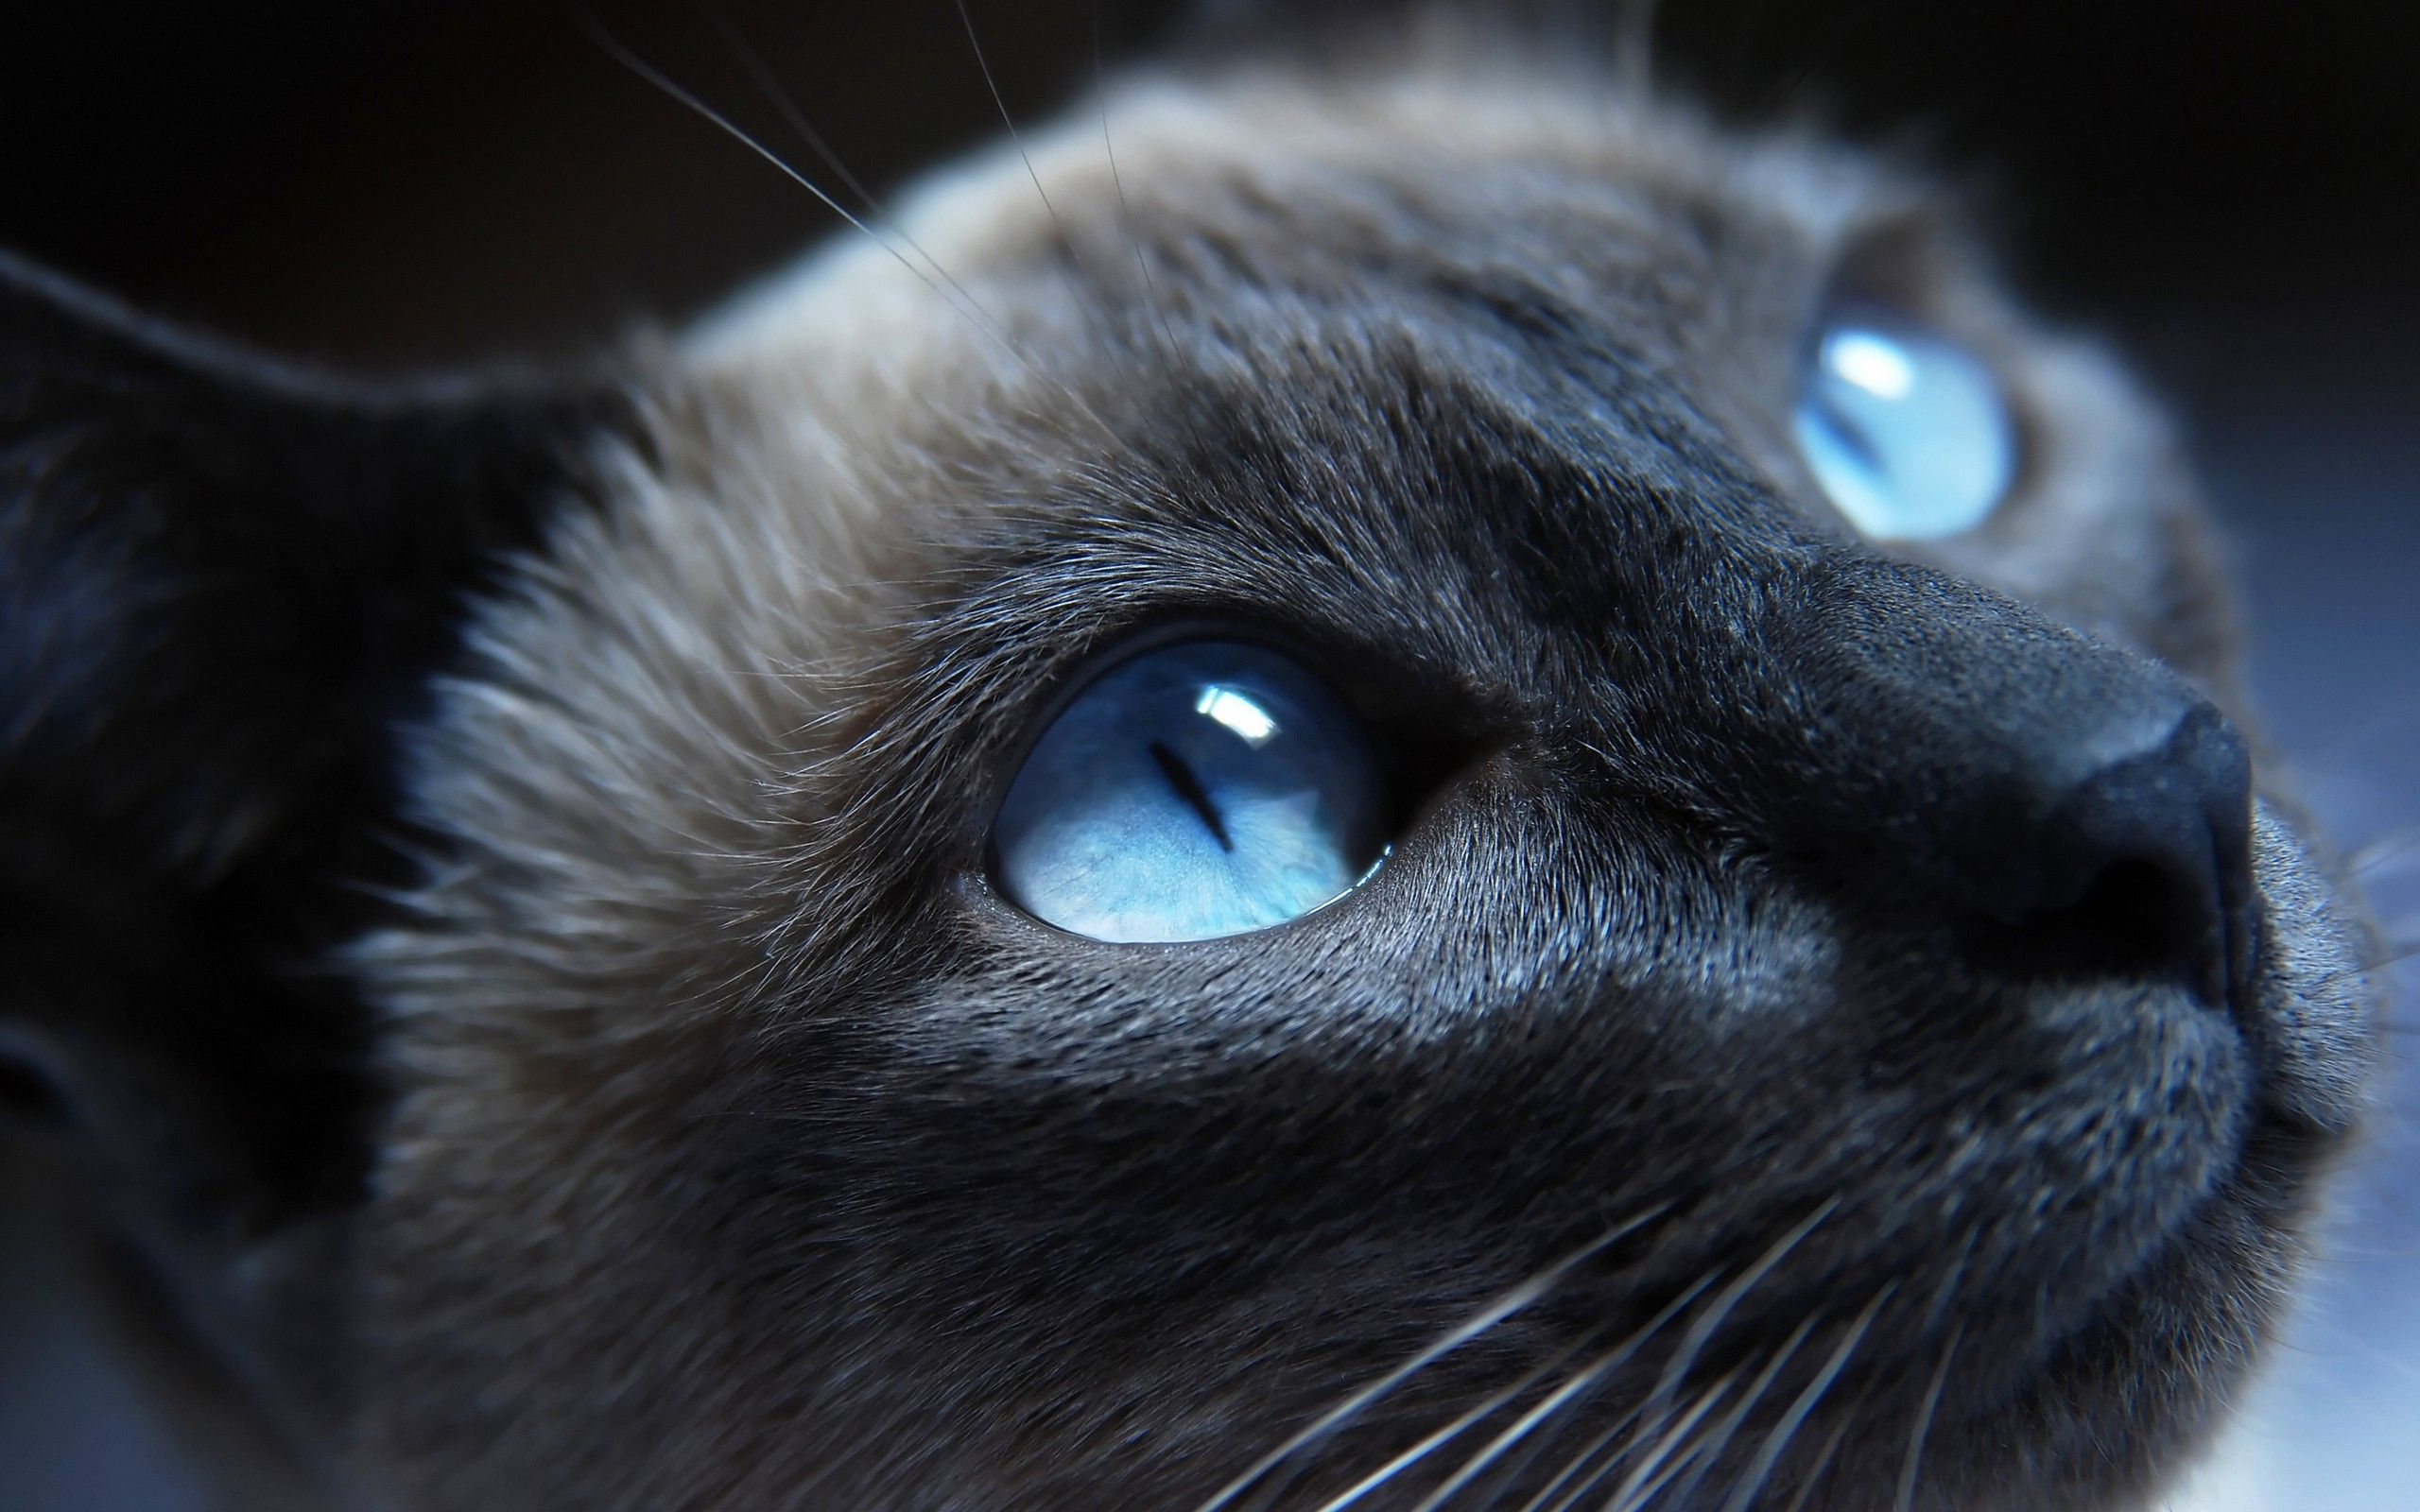 Cat with blue eyes wallpaper. Cat with blue eyes